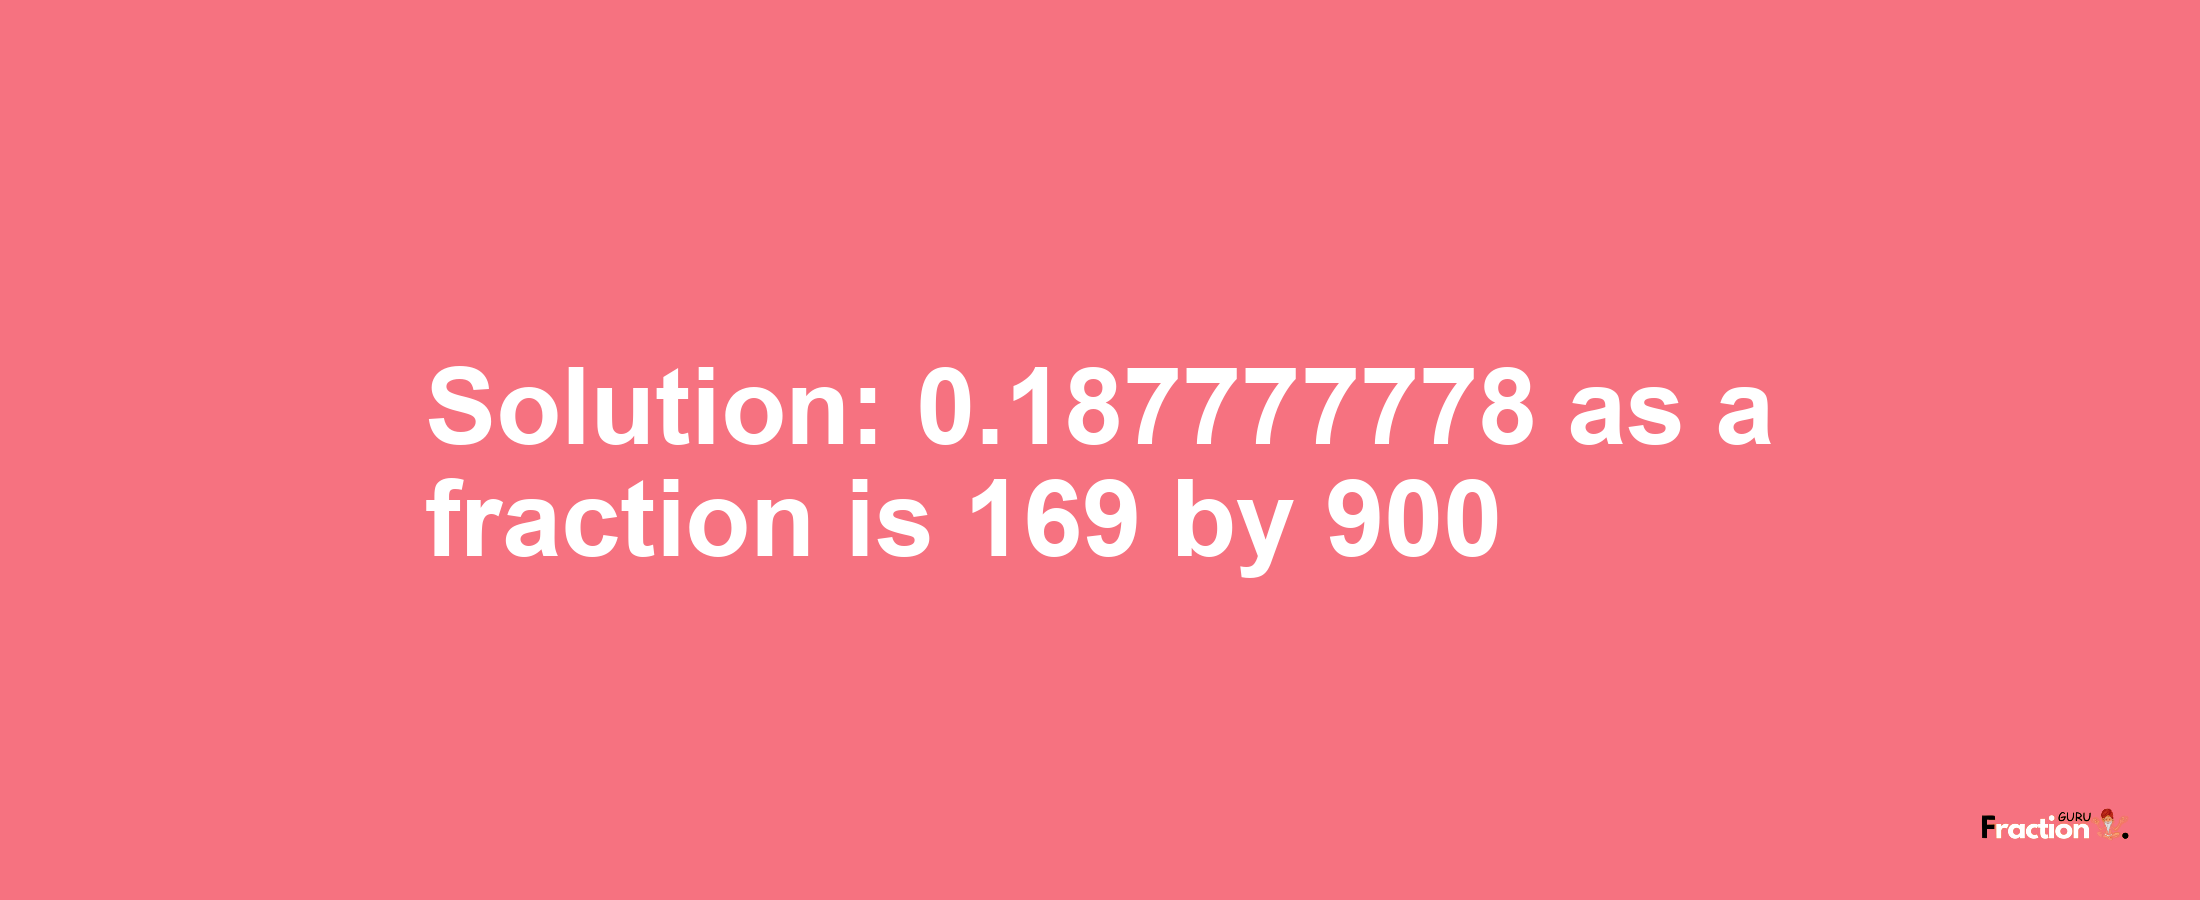 Solution:0.187777778 as a fraction is 169/900